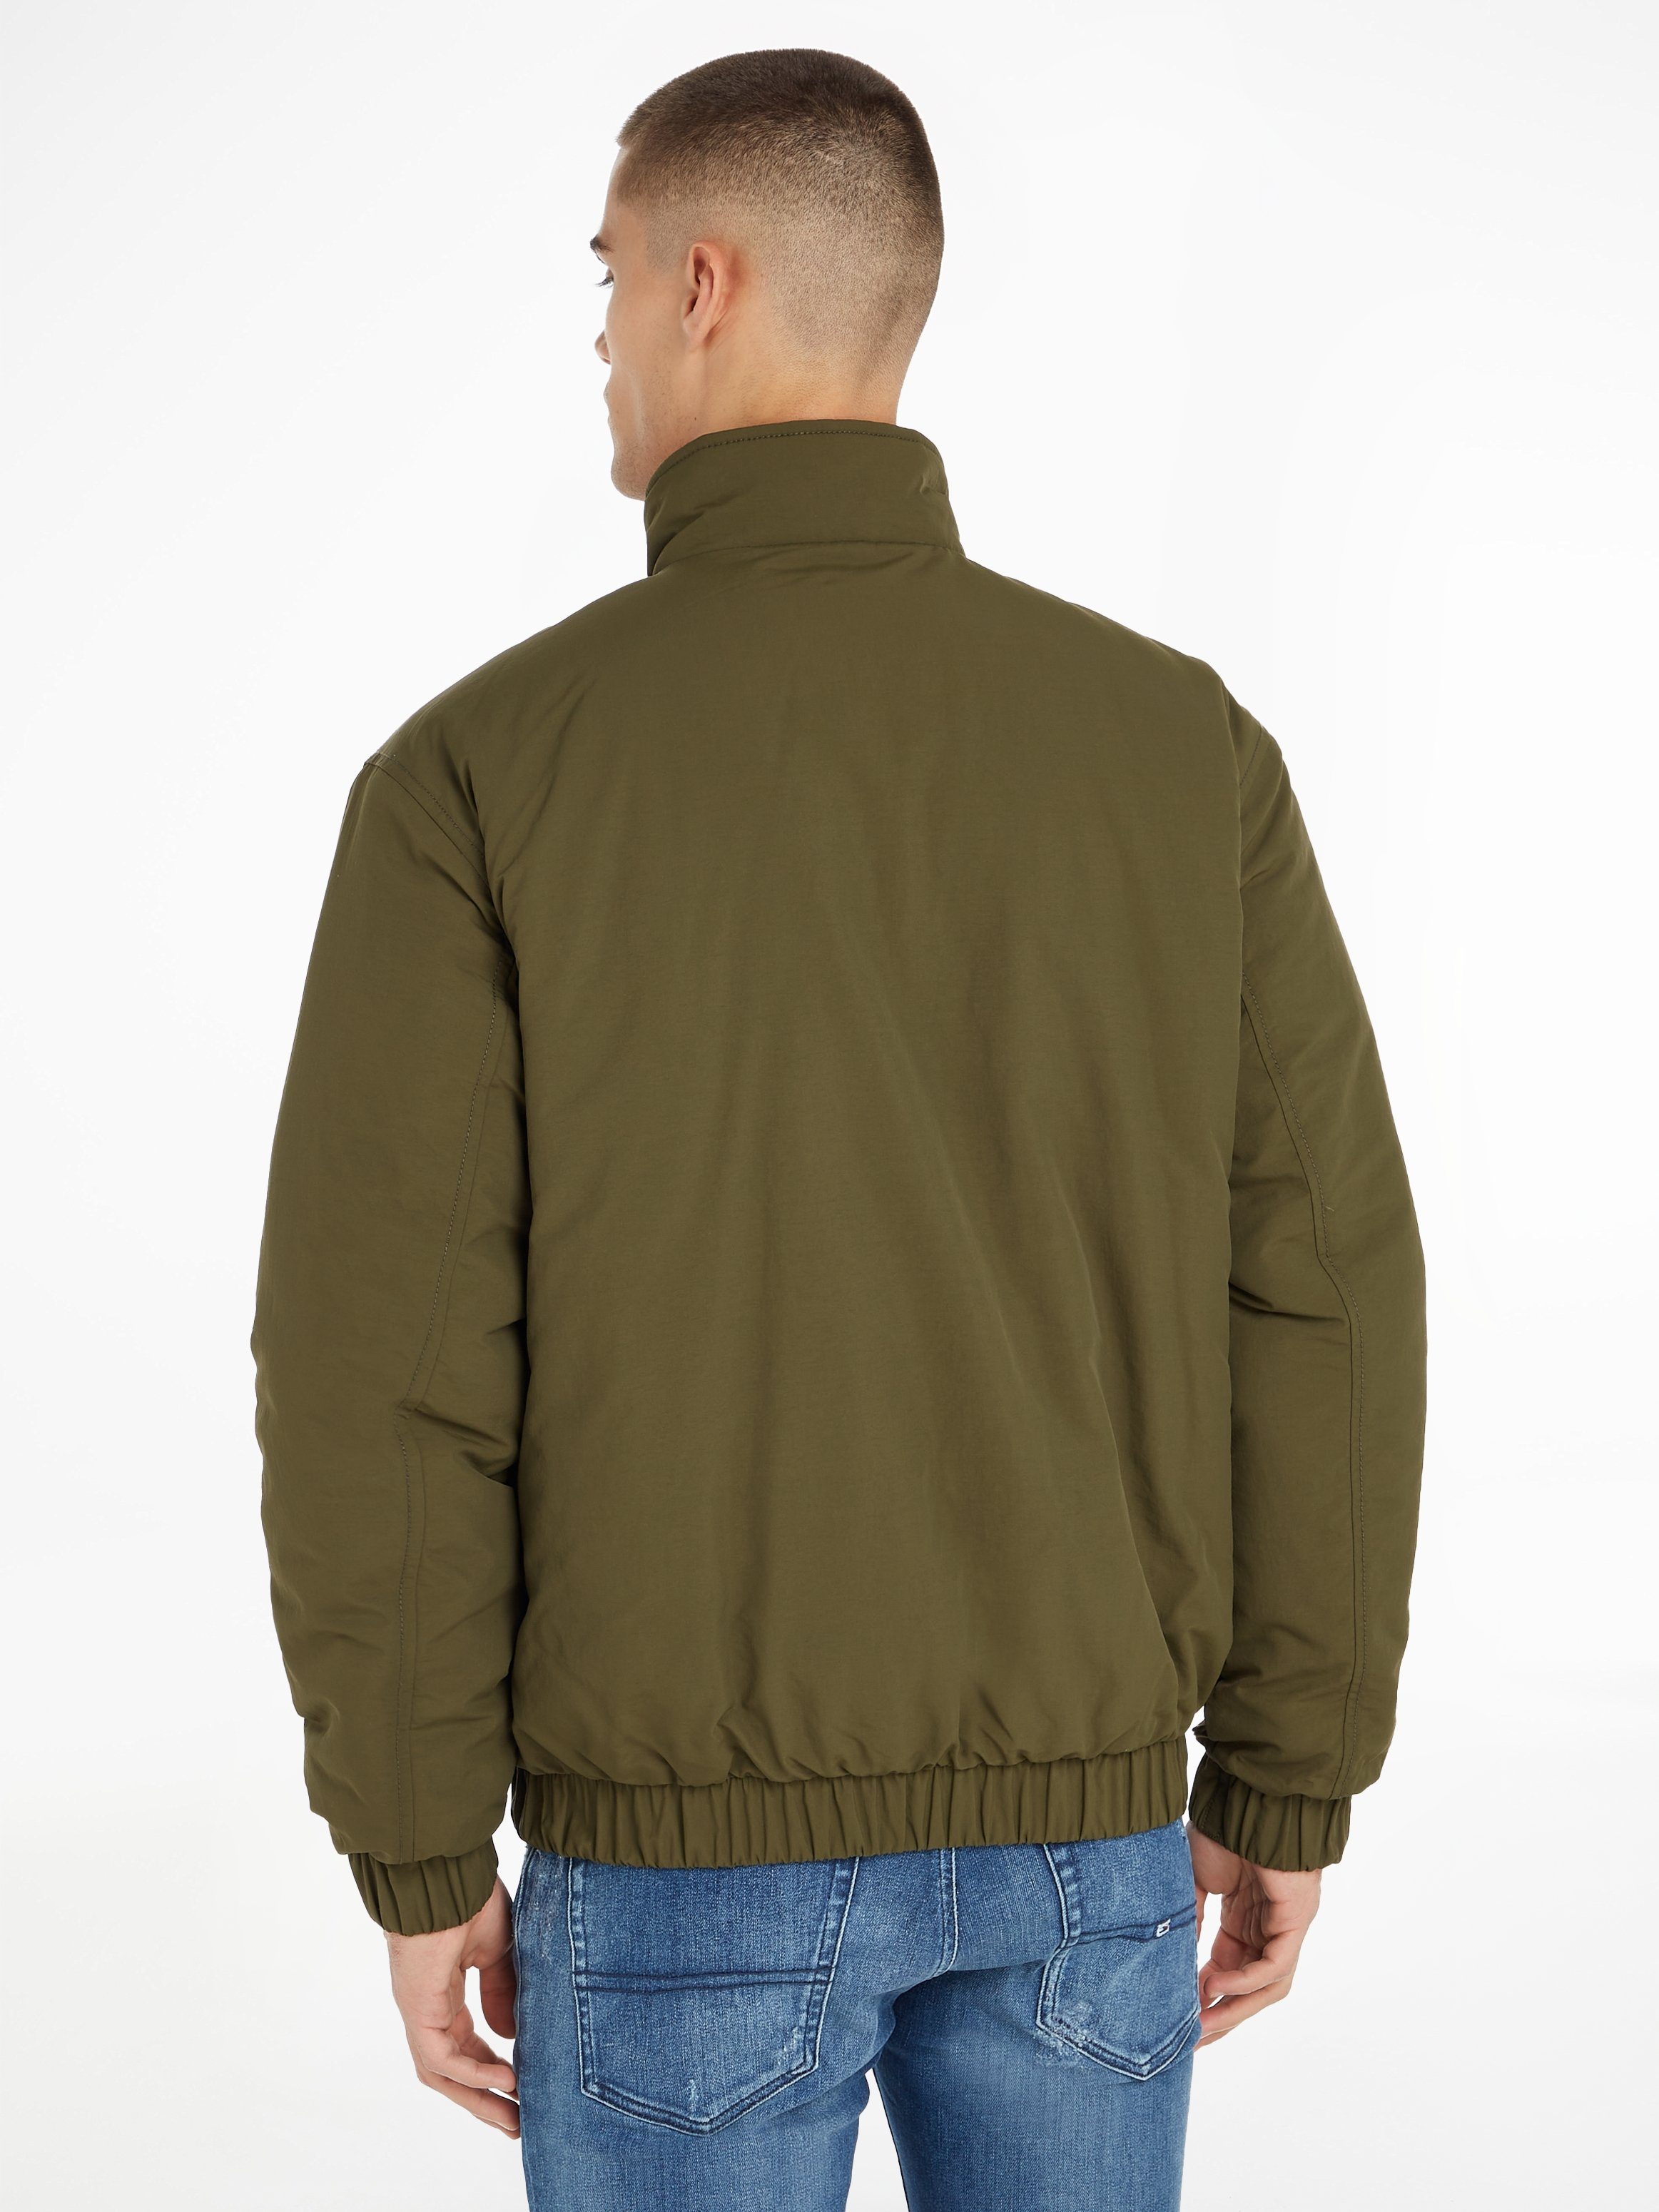 Tommy Jeans Blouson TJM ESSENTIAL PADDED Green JACKET Olive Drab